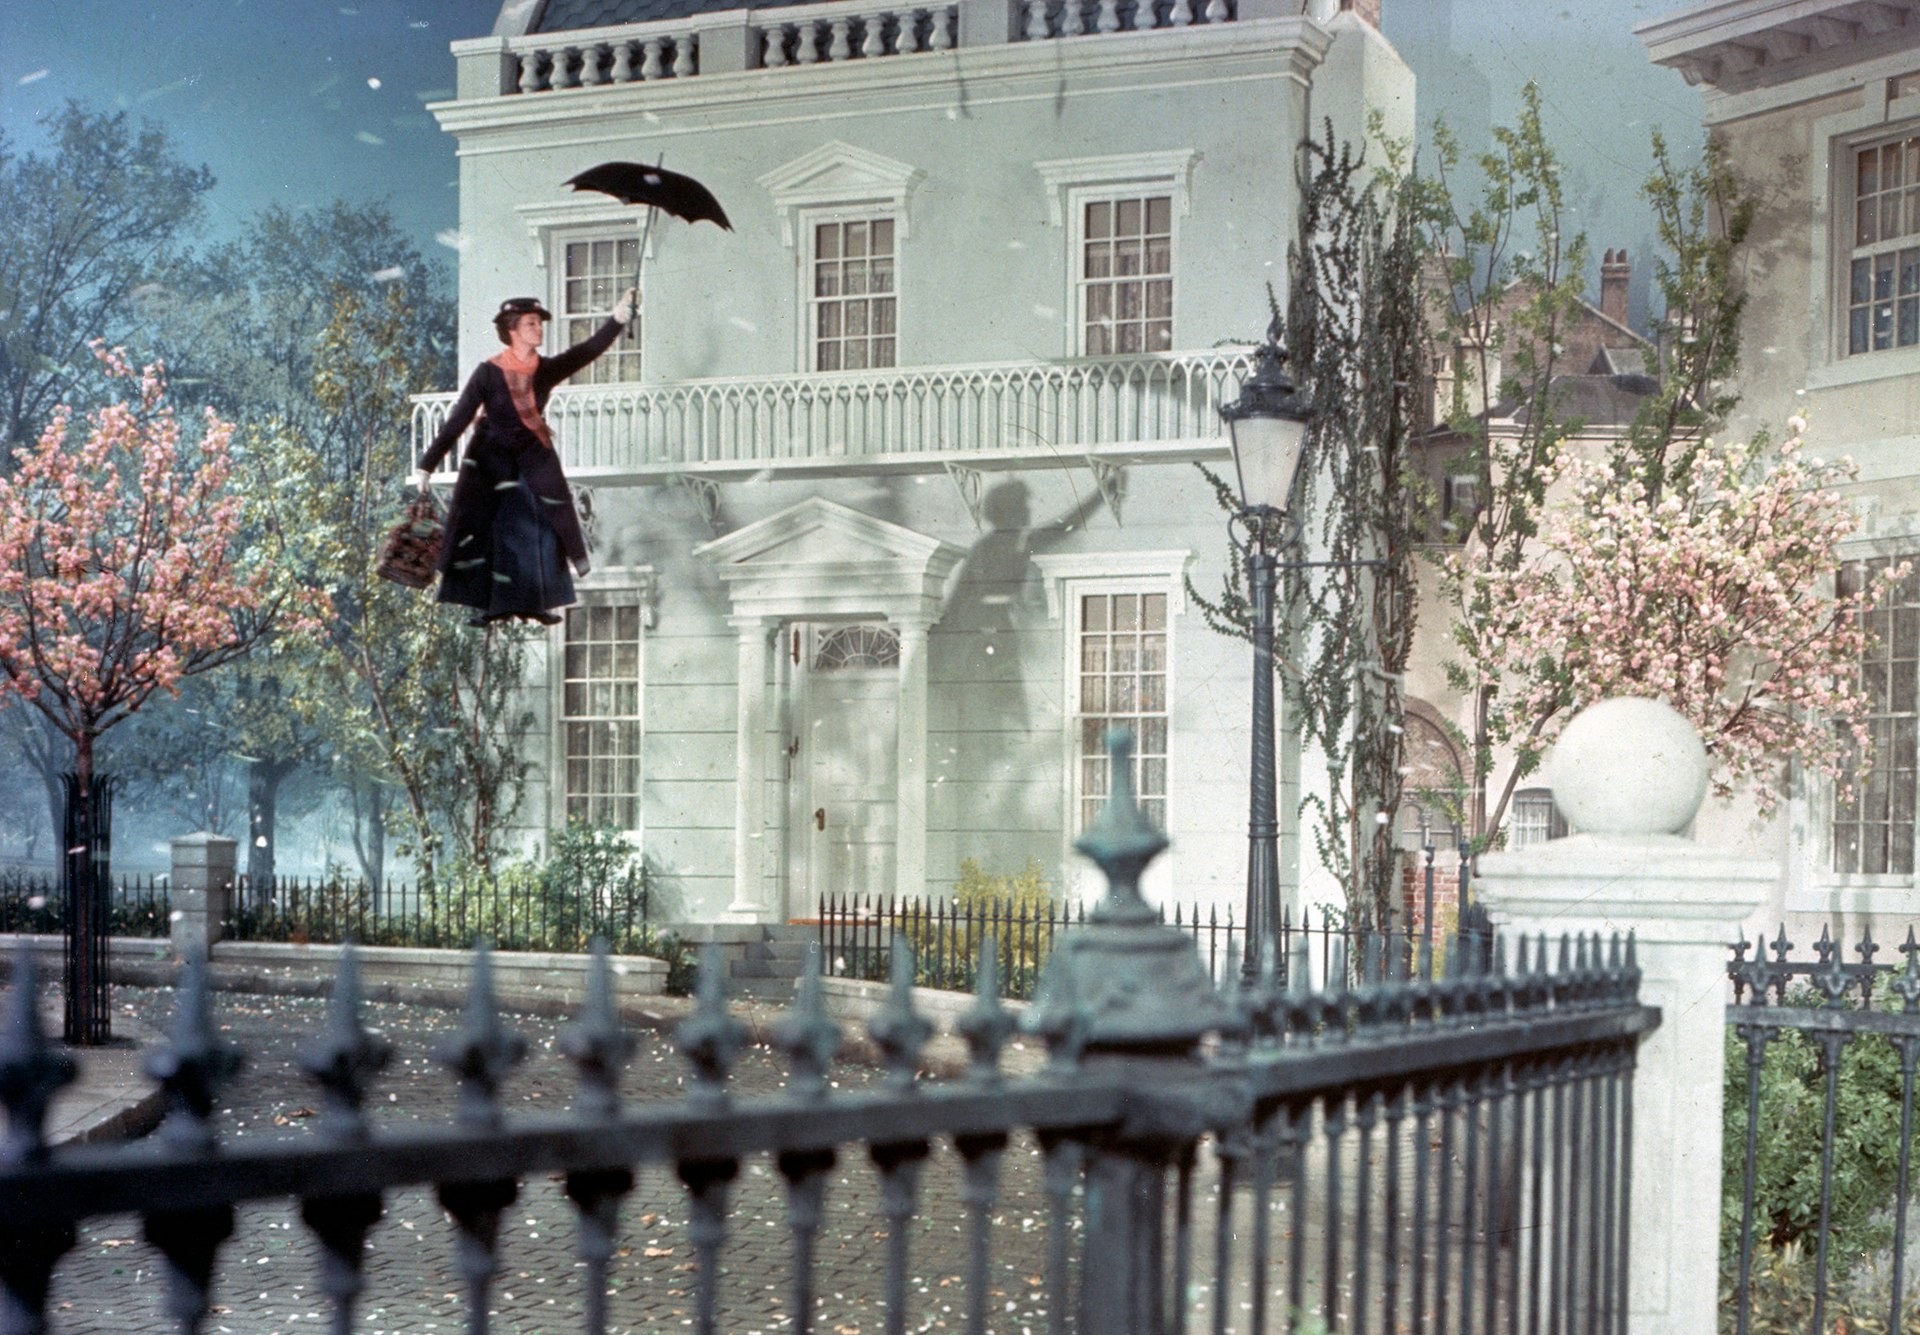 Actress JULIE ANDREWS as Mary Poppins floats down towards townhouses using her umbrella.